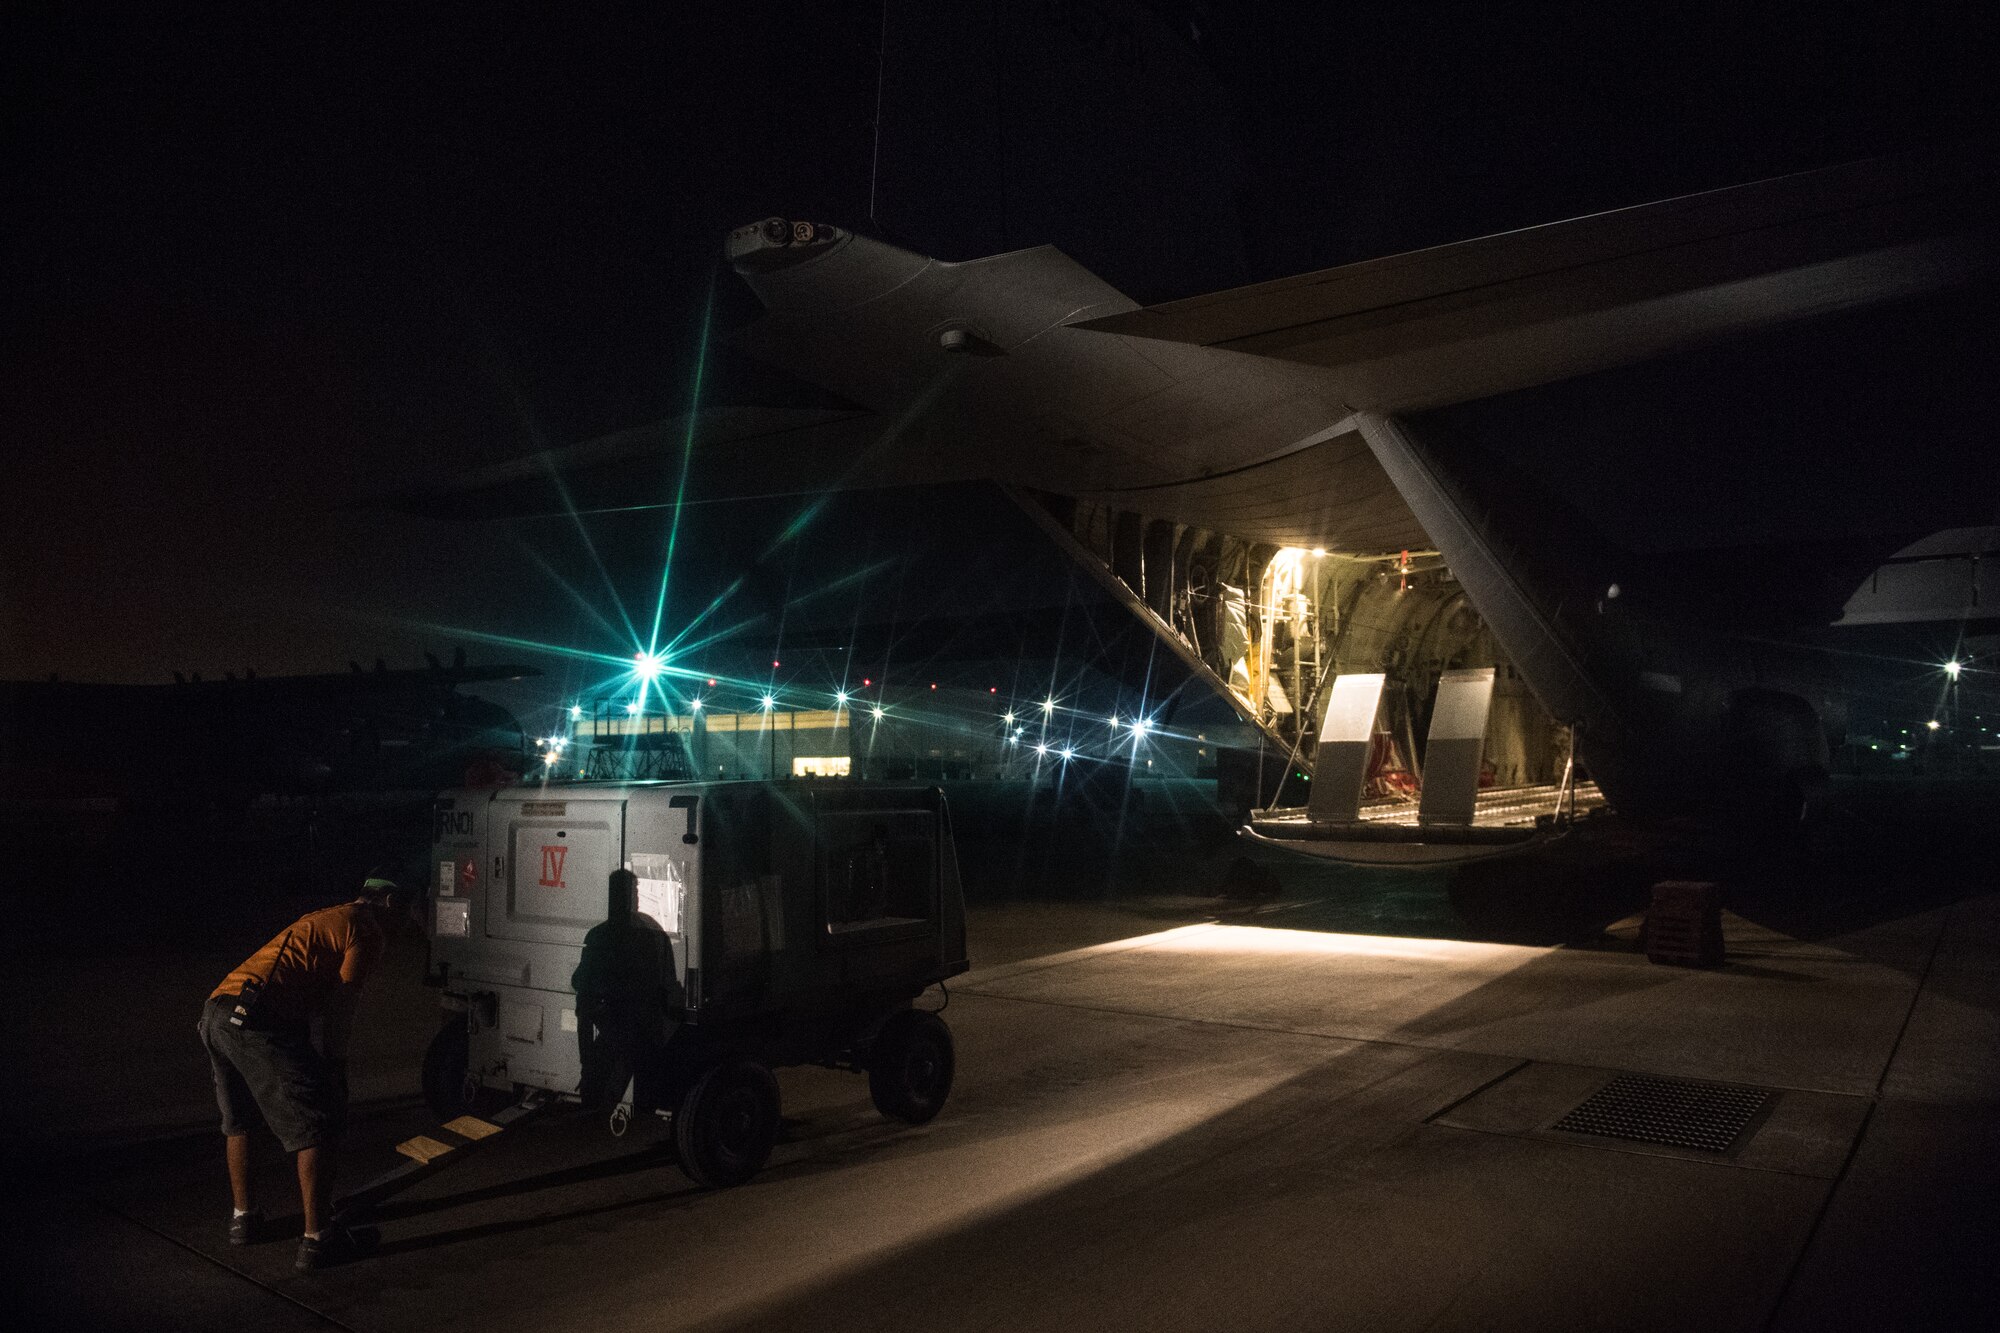 An air operations member prepares a generator before loading it onto a C-130J Super Hercules with the help of 75th Expeditionary Airlift Squadron Airmen at Camp Lemonnier, Djibouti, June 5, 2019. The 75th EAS provides support in medical evacuations, disaster relief, humanitarian and airdrop operations. (U.S. Air Force photo by Staff Sgt. Devin Boyer)